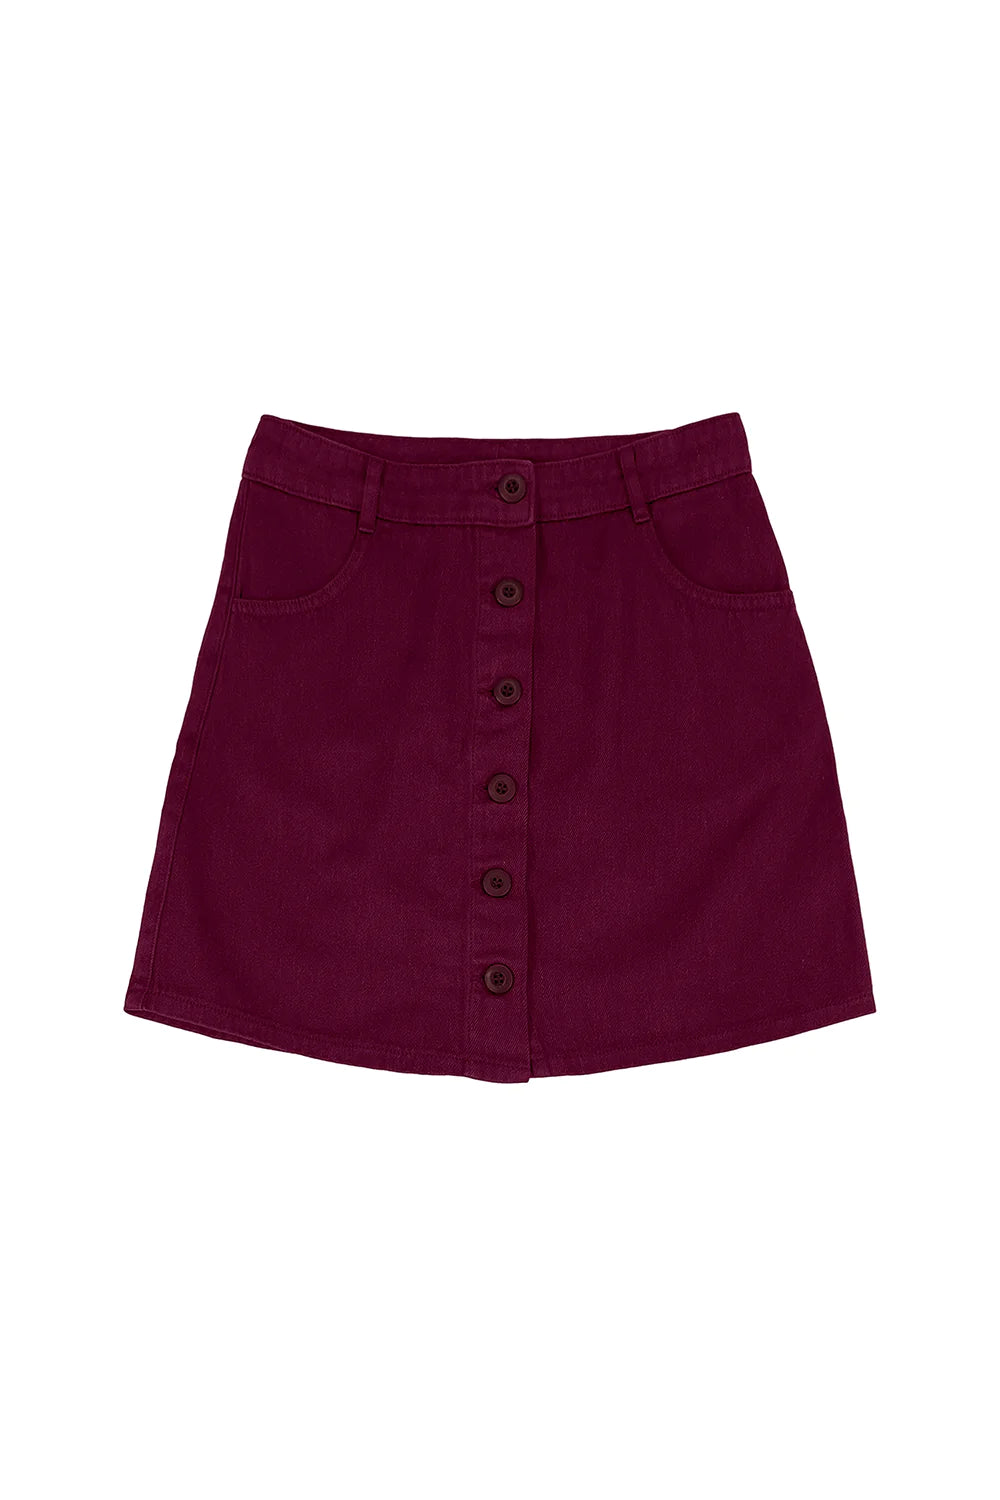 JUNGMAVEN Sustainable Hemp Clothing - Women's Button Front Mini Skirt - Burgundy Cotton Twill - Made in USA